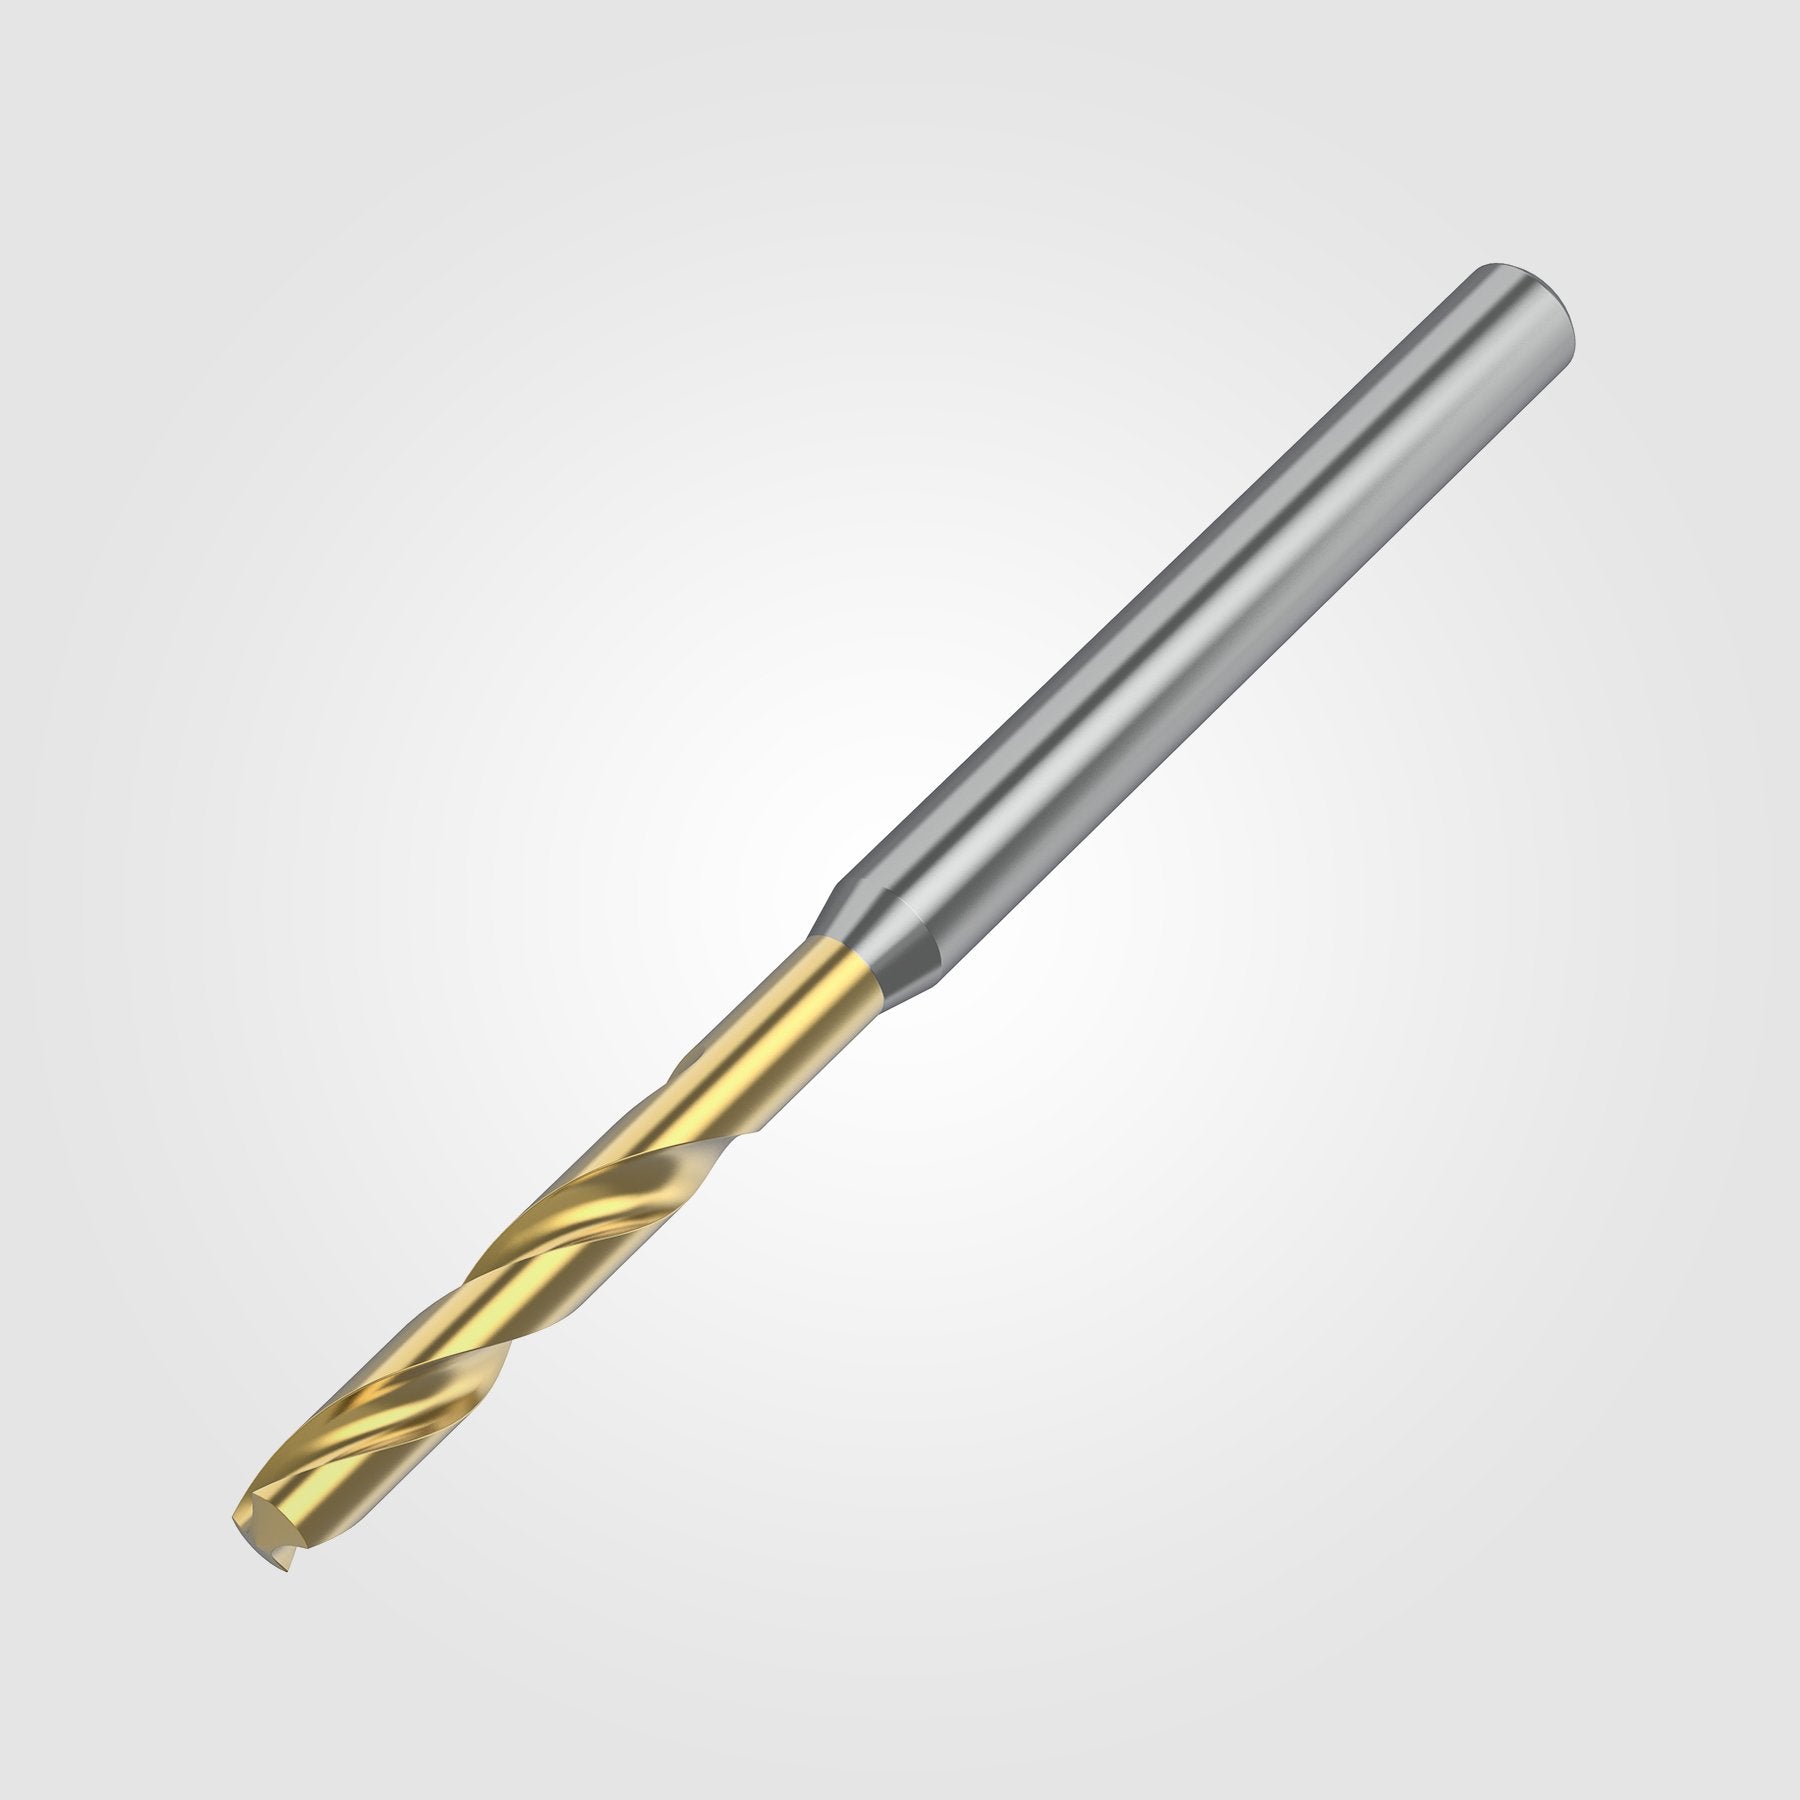 GOdrill (THROUGH COOLANT) | 5.954mm / .2344" / 3xD | SOLID CARBIDE DRILL | 4151148